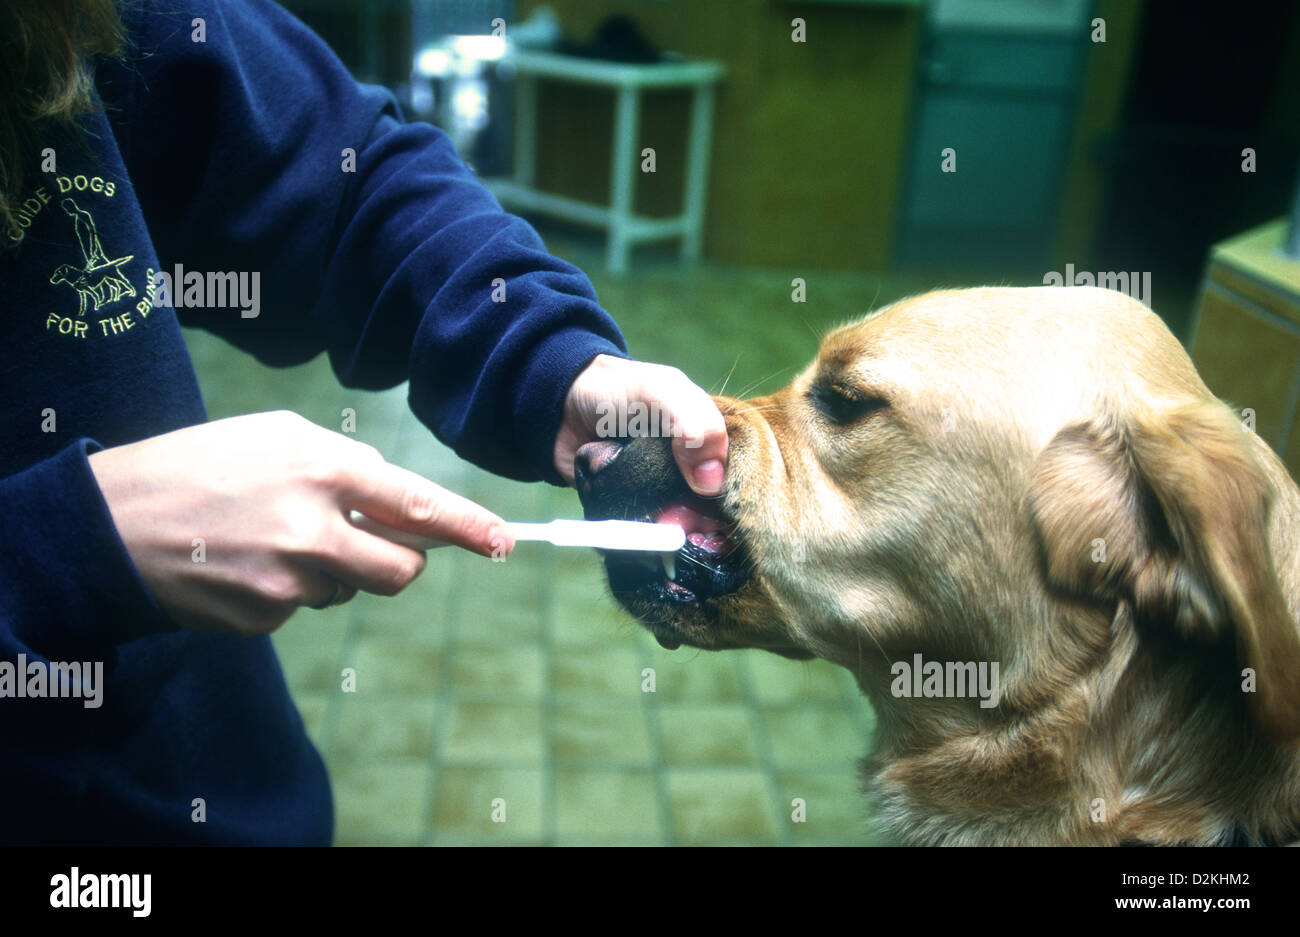 Staff member cleaning guide dog's teeth, Wokingham Training Centre, Guide Dogs for the Blind Association, UK. Stock Photo